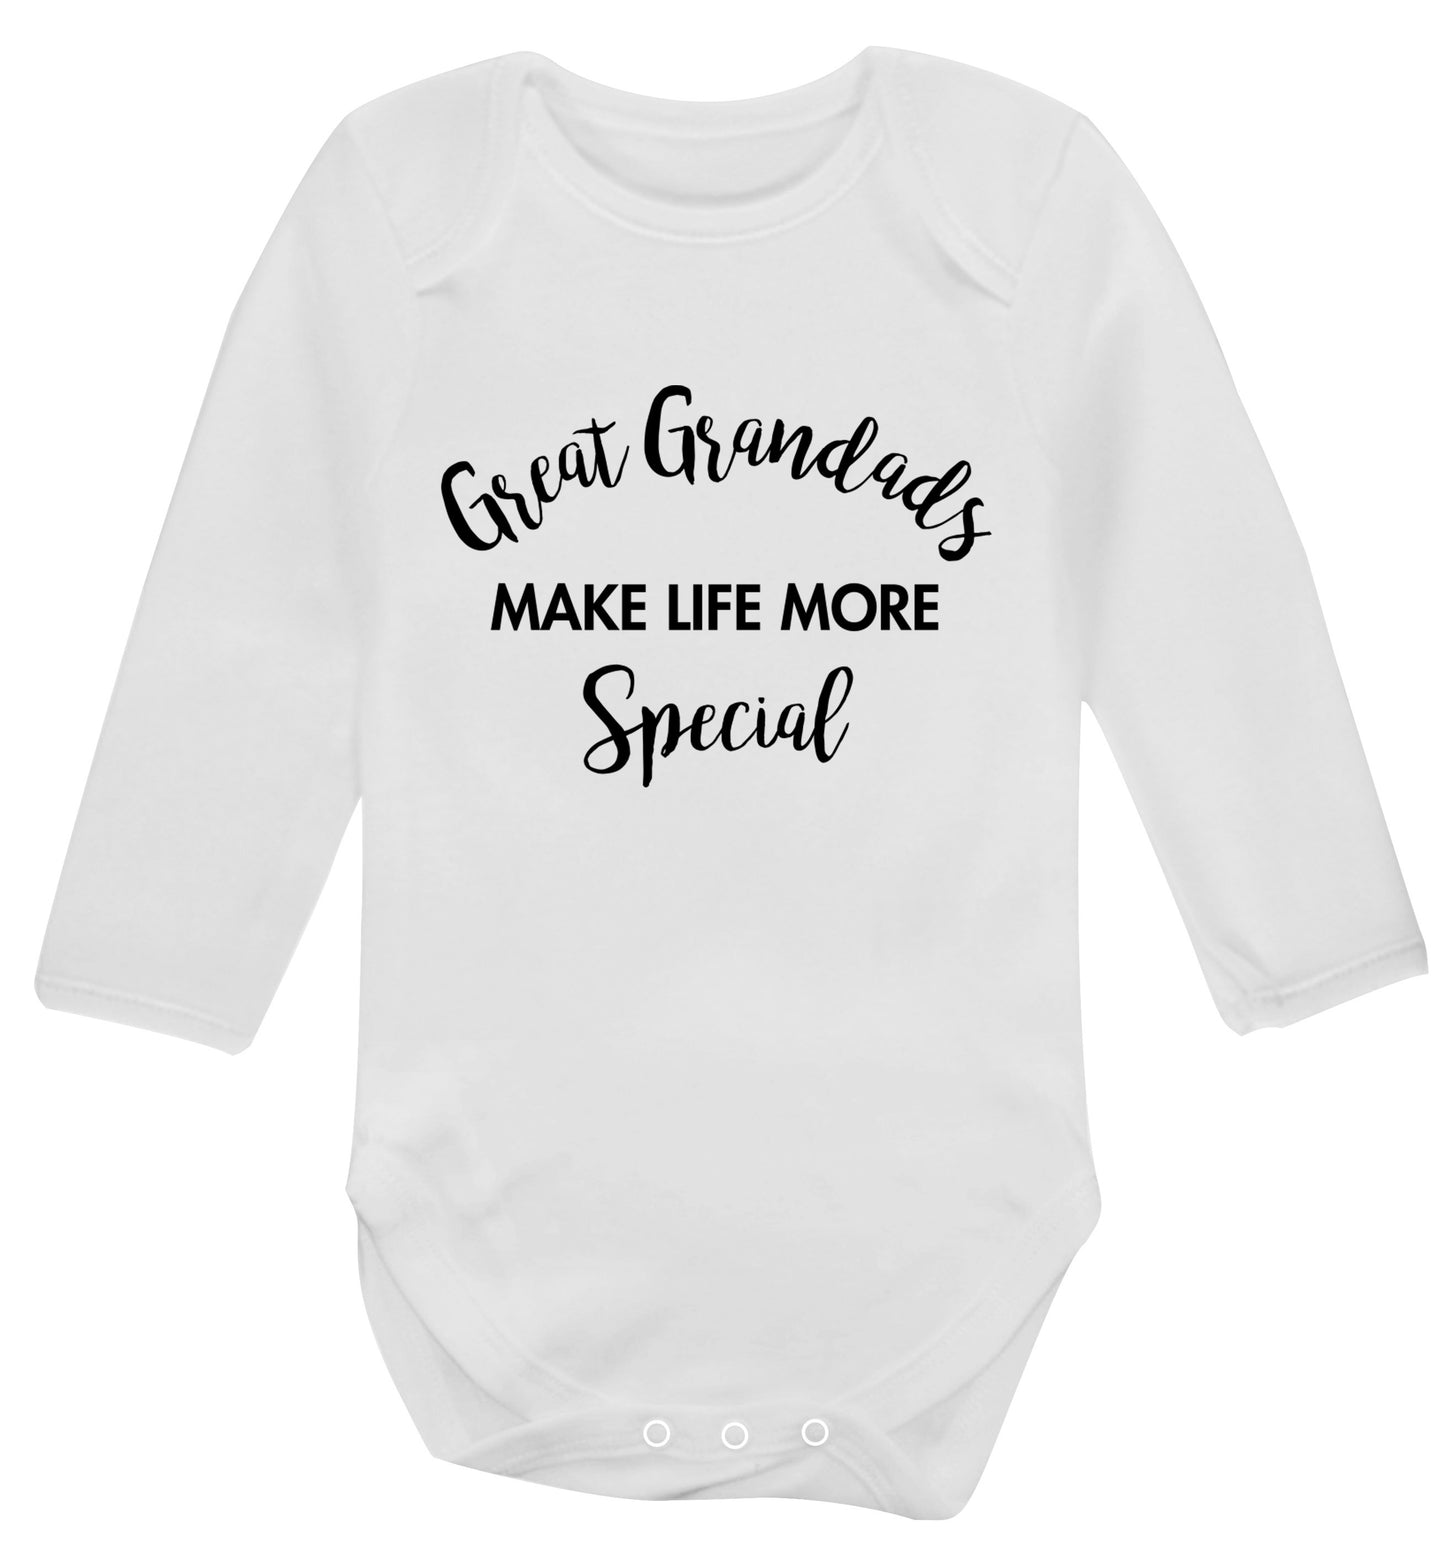 Great Grandads make life more special Baby Vest long sleeved white 6-12 months